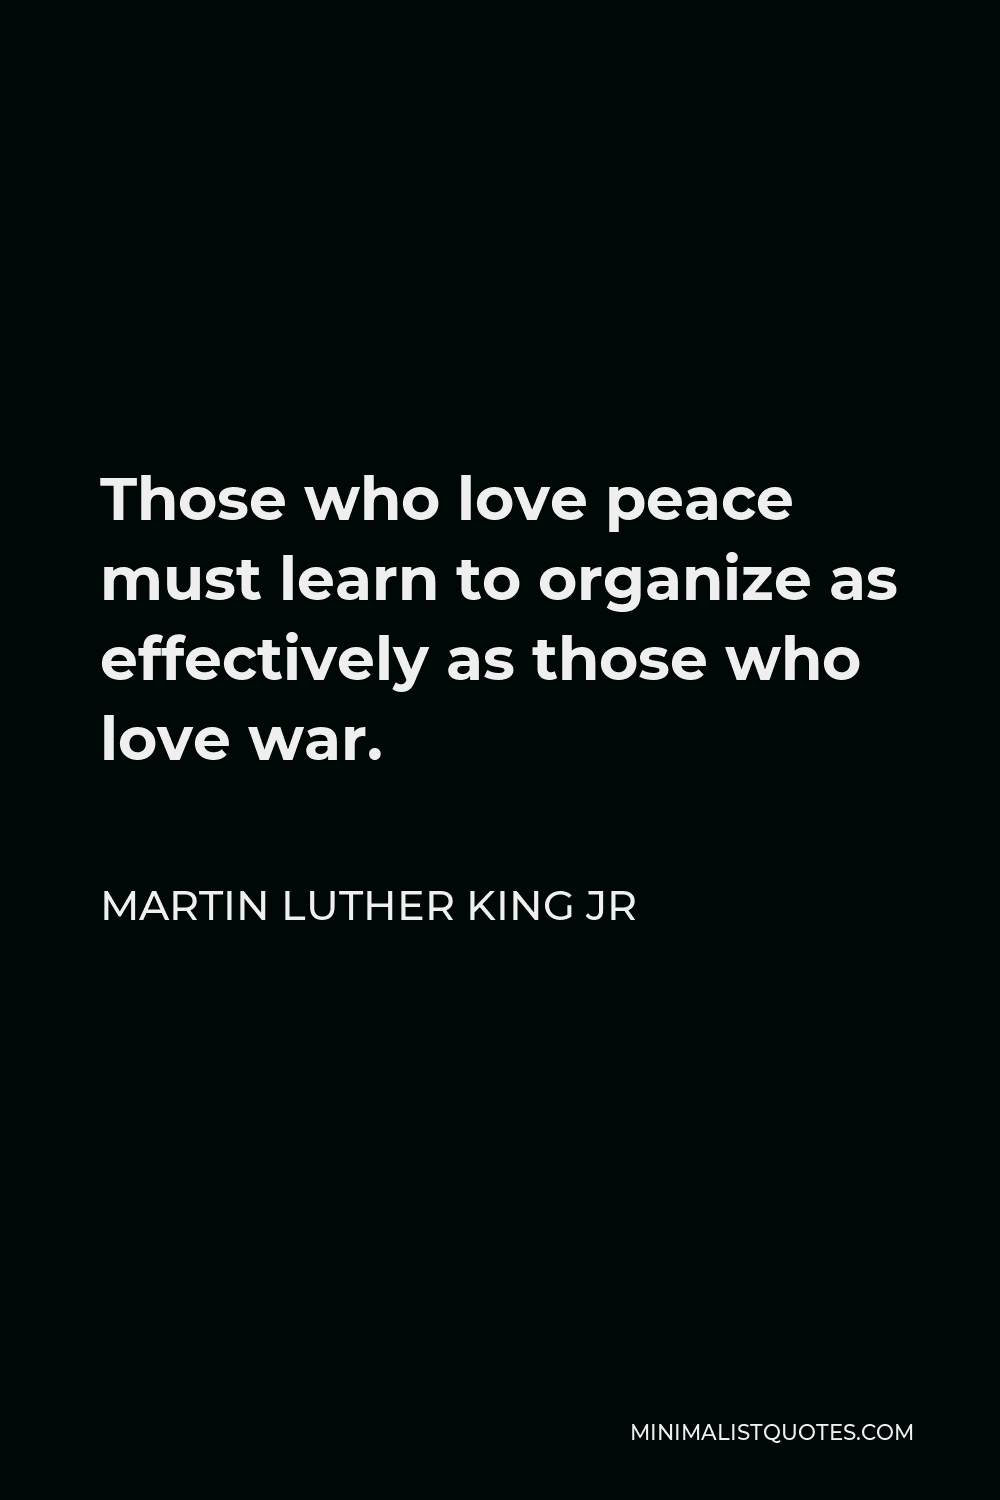 Martin Luther King Jr Quote Those Who Love Peace Must Learn To Organize As Effectively As Those Who Love War